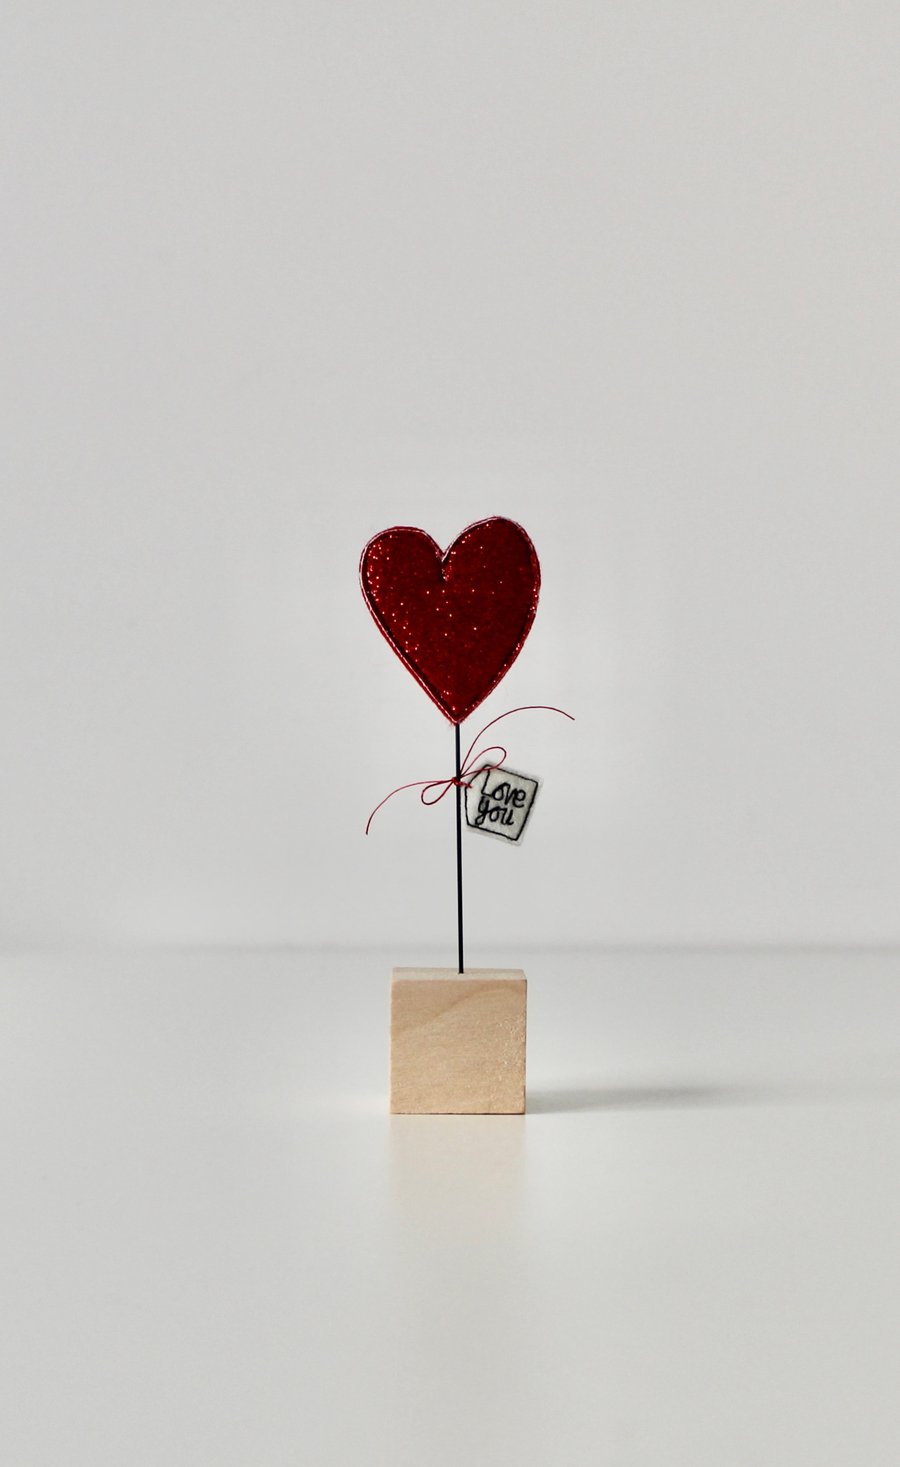 'Love You' - Heart with a Wire Stem and Wooden Block